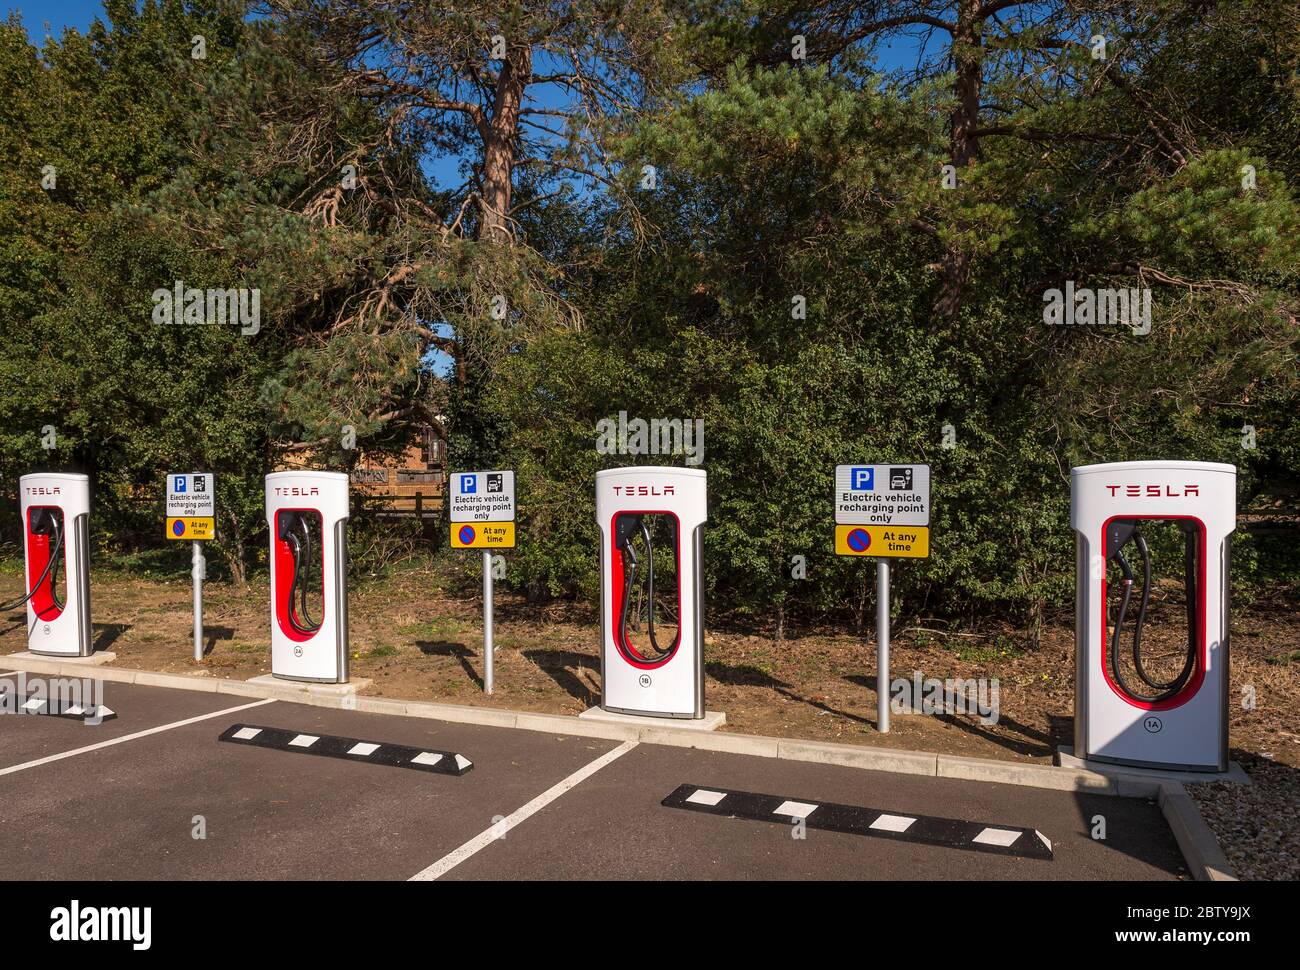 Electric vehicle charging points in a car park in England. Stock Photo